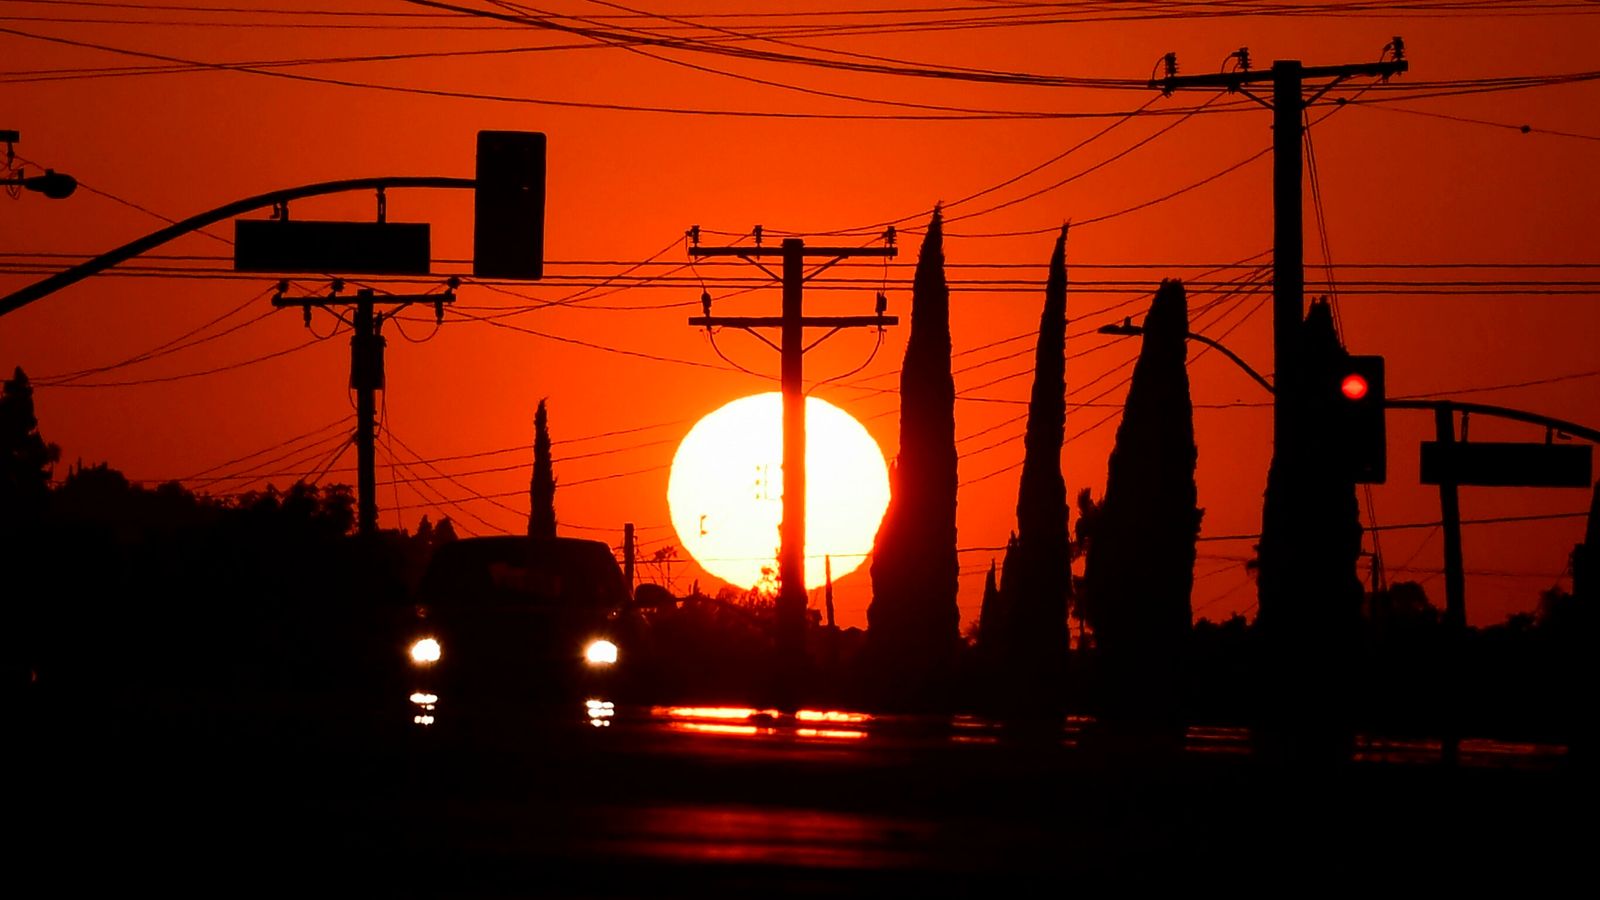 LA is used to apocalyptic scenes in films - but this heatwave shows real impact of climate change - Sky News